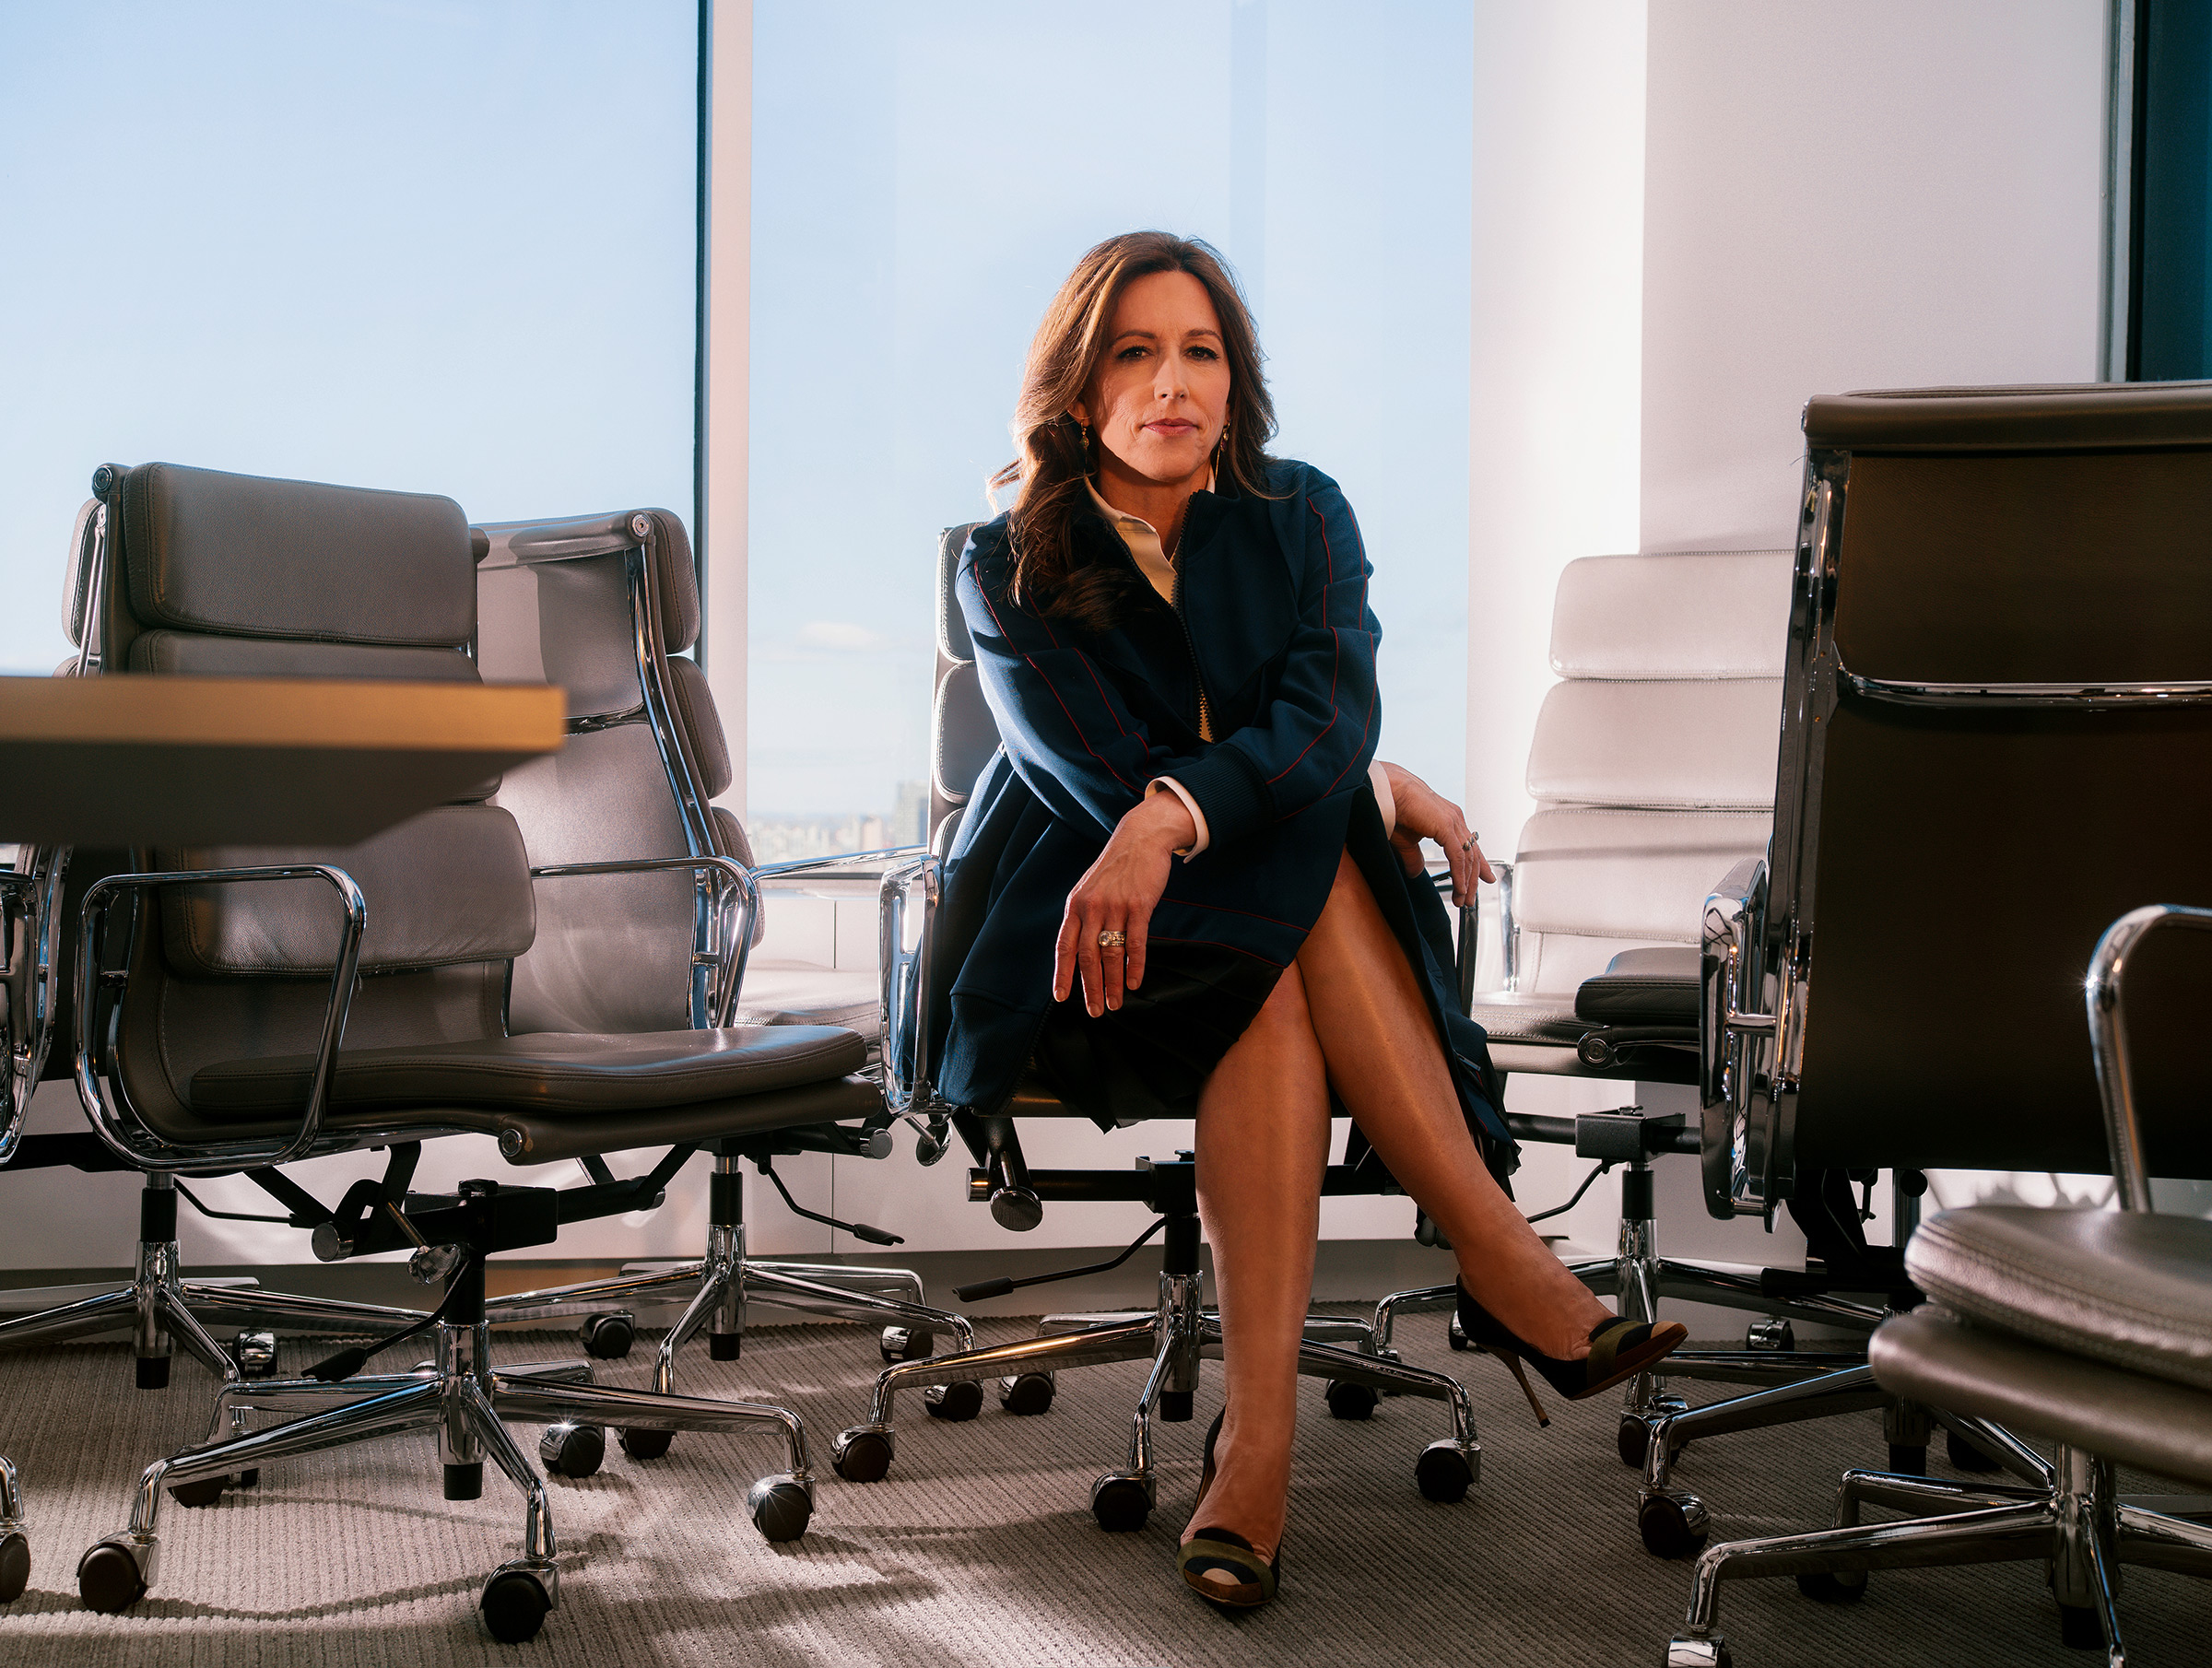 “I think it's the responsibility of CEOs to teach women the skills that they don't naturally have when they come to their firms,” says Just, at PEAK6’s office in New York City.